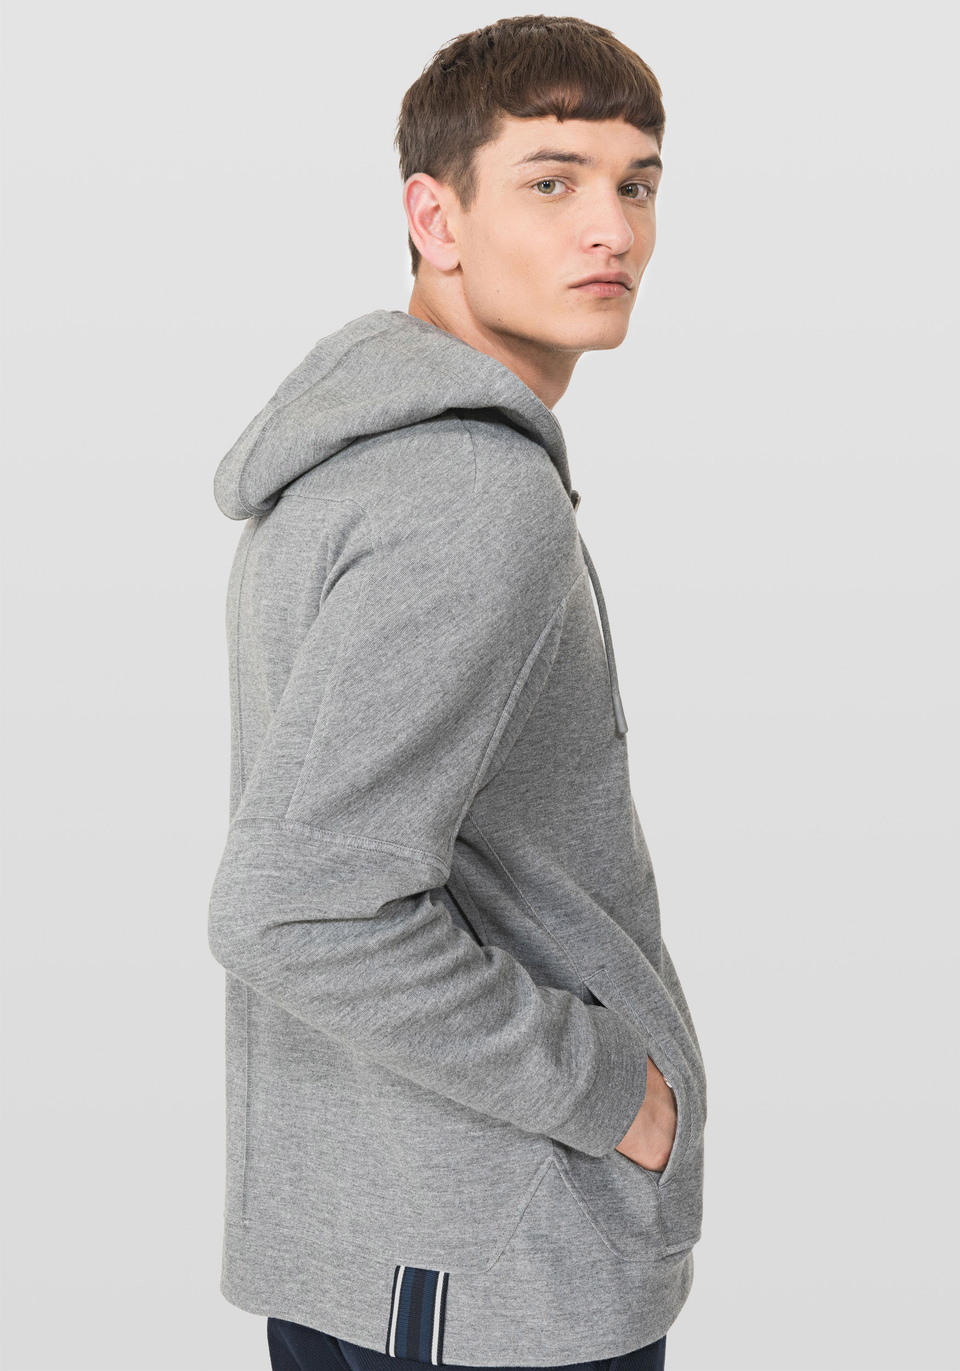 COTTON-BLEND SWEATSHIRT IN AN OVERSIZED FIT WITH STRAIGHT HEM DETAIL - Antony Morato Online Shop